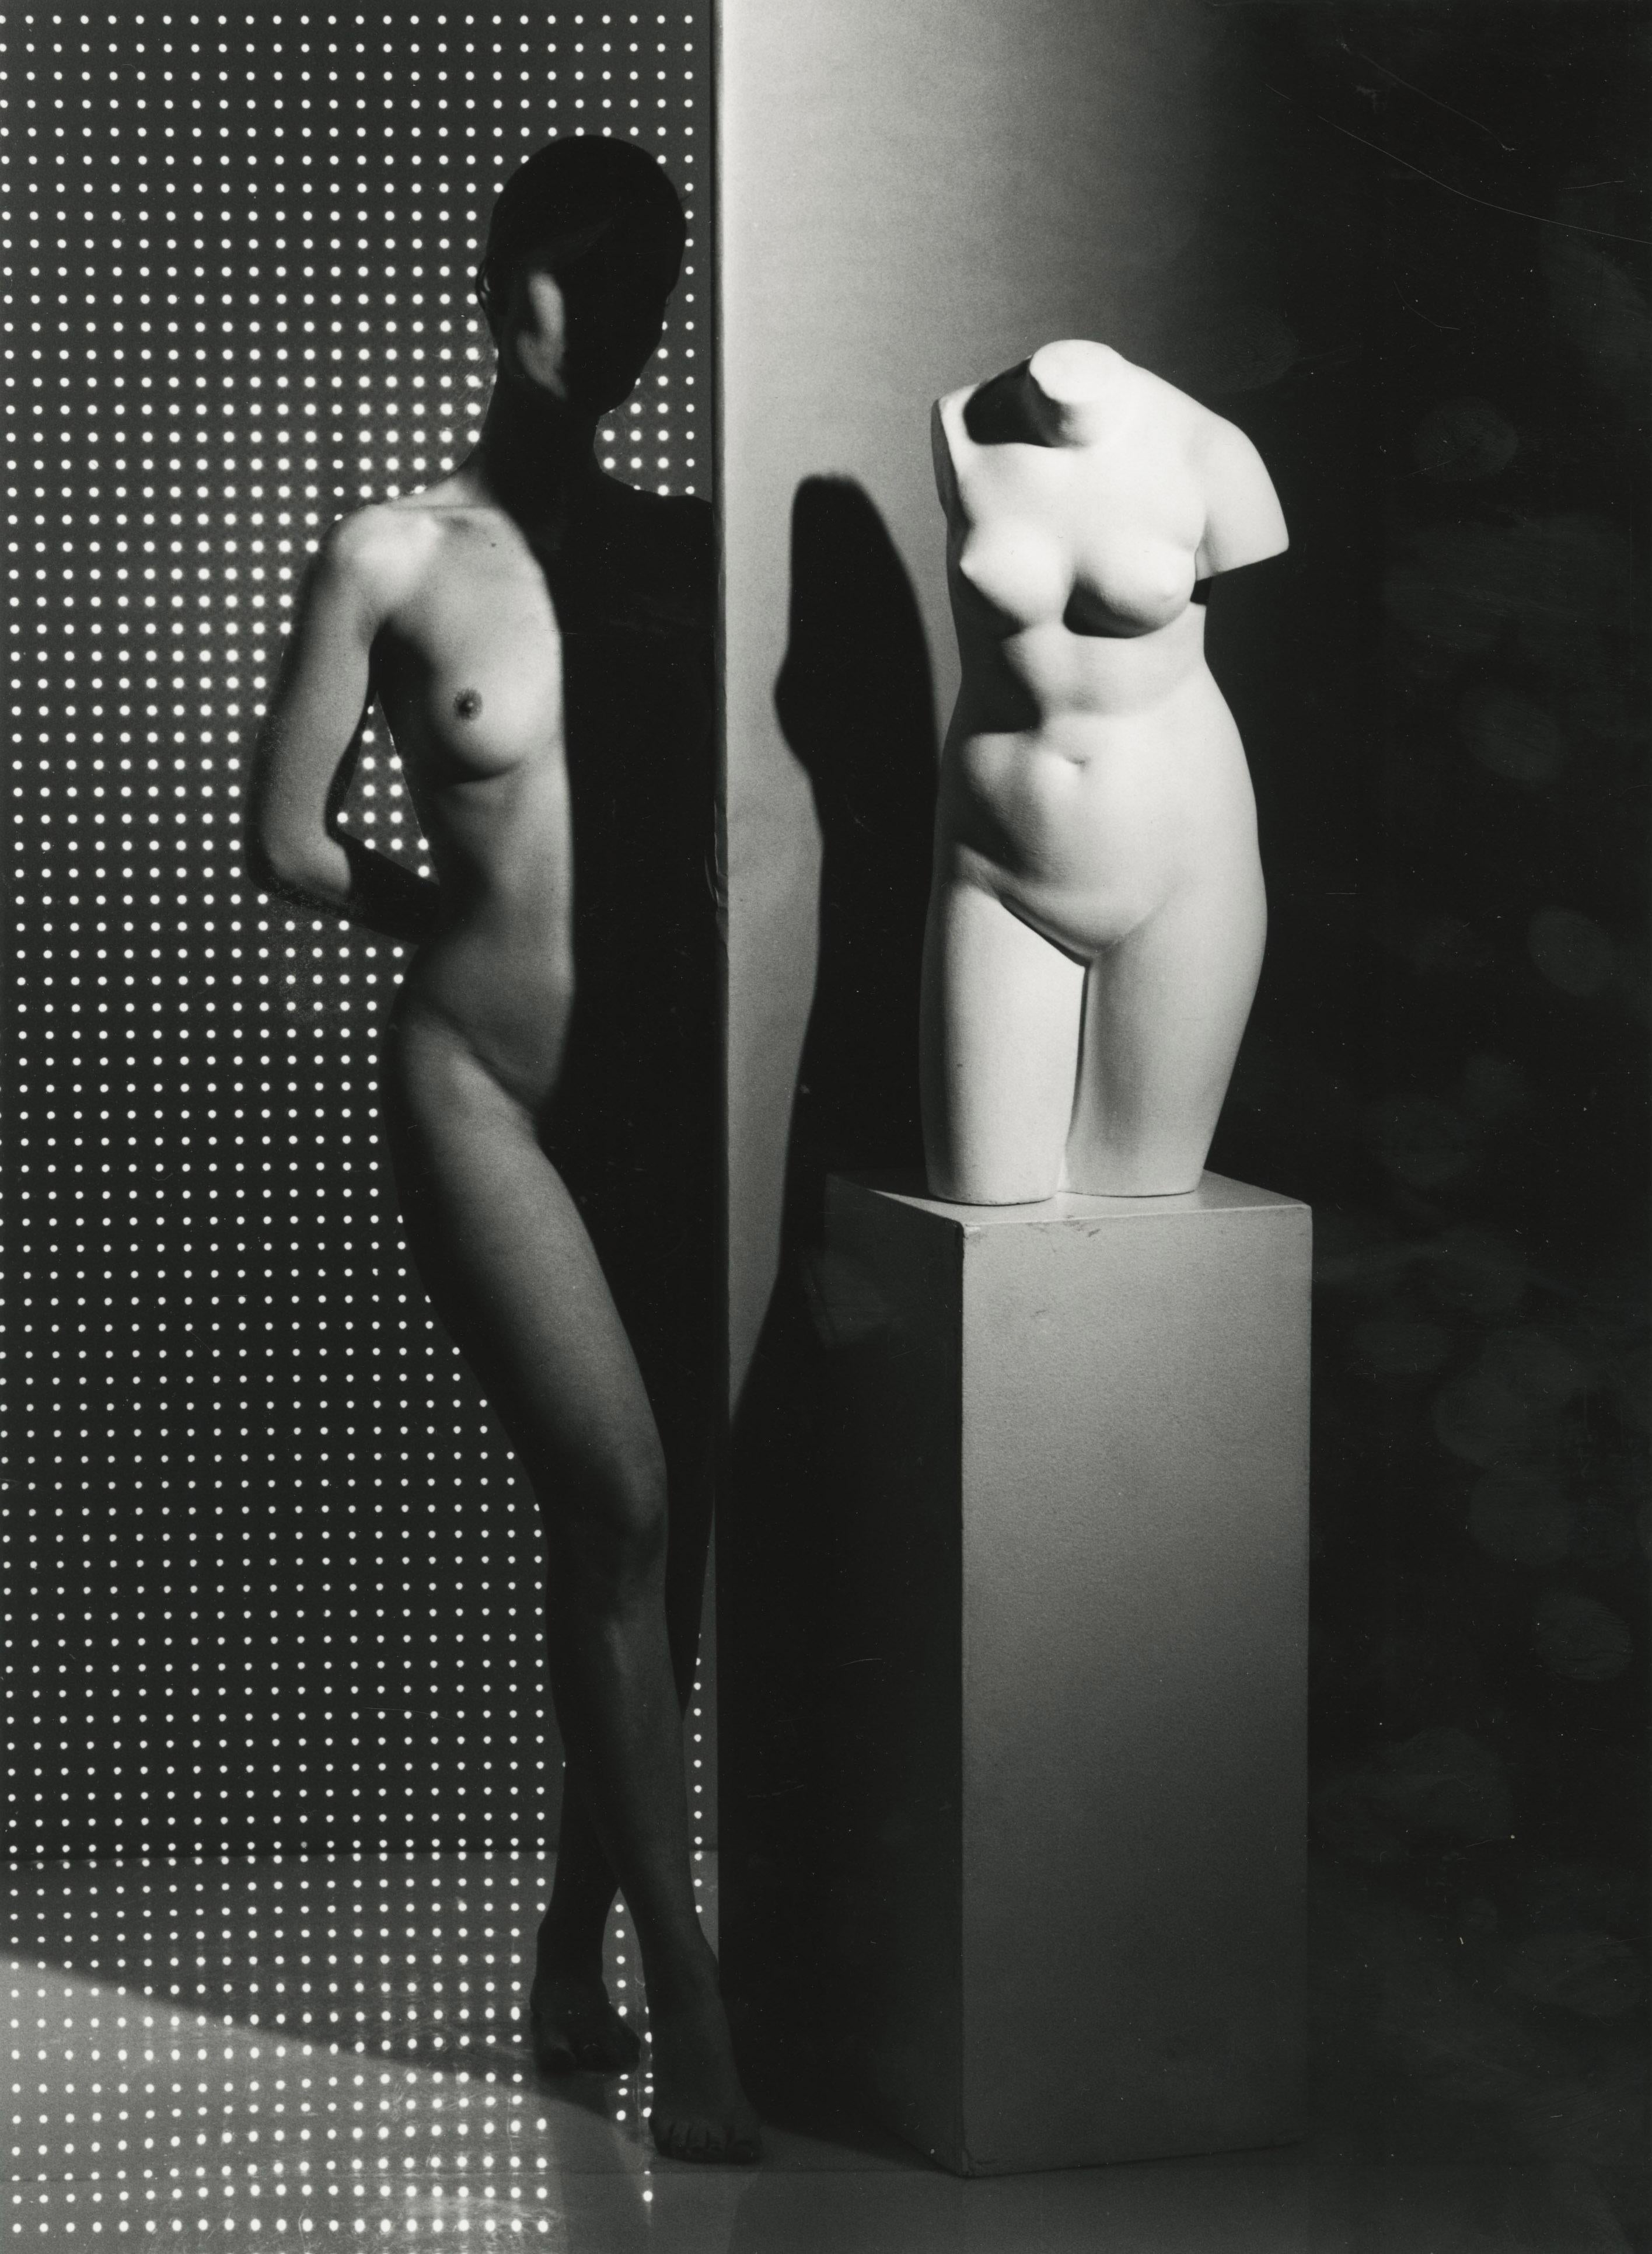 Guenter Knop Nude Photograph - Classic